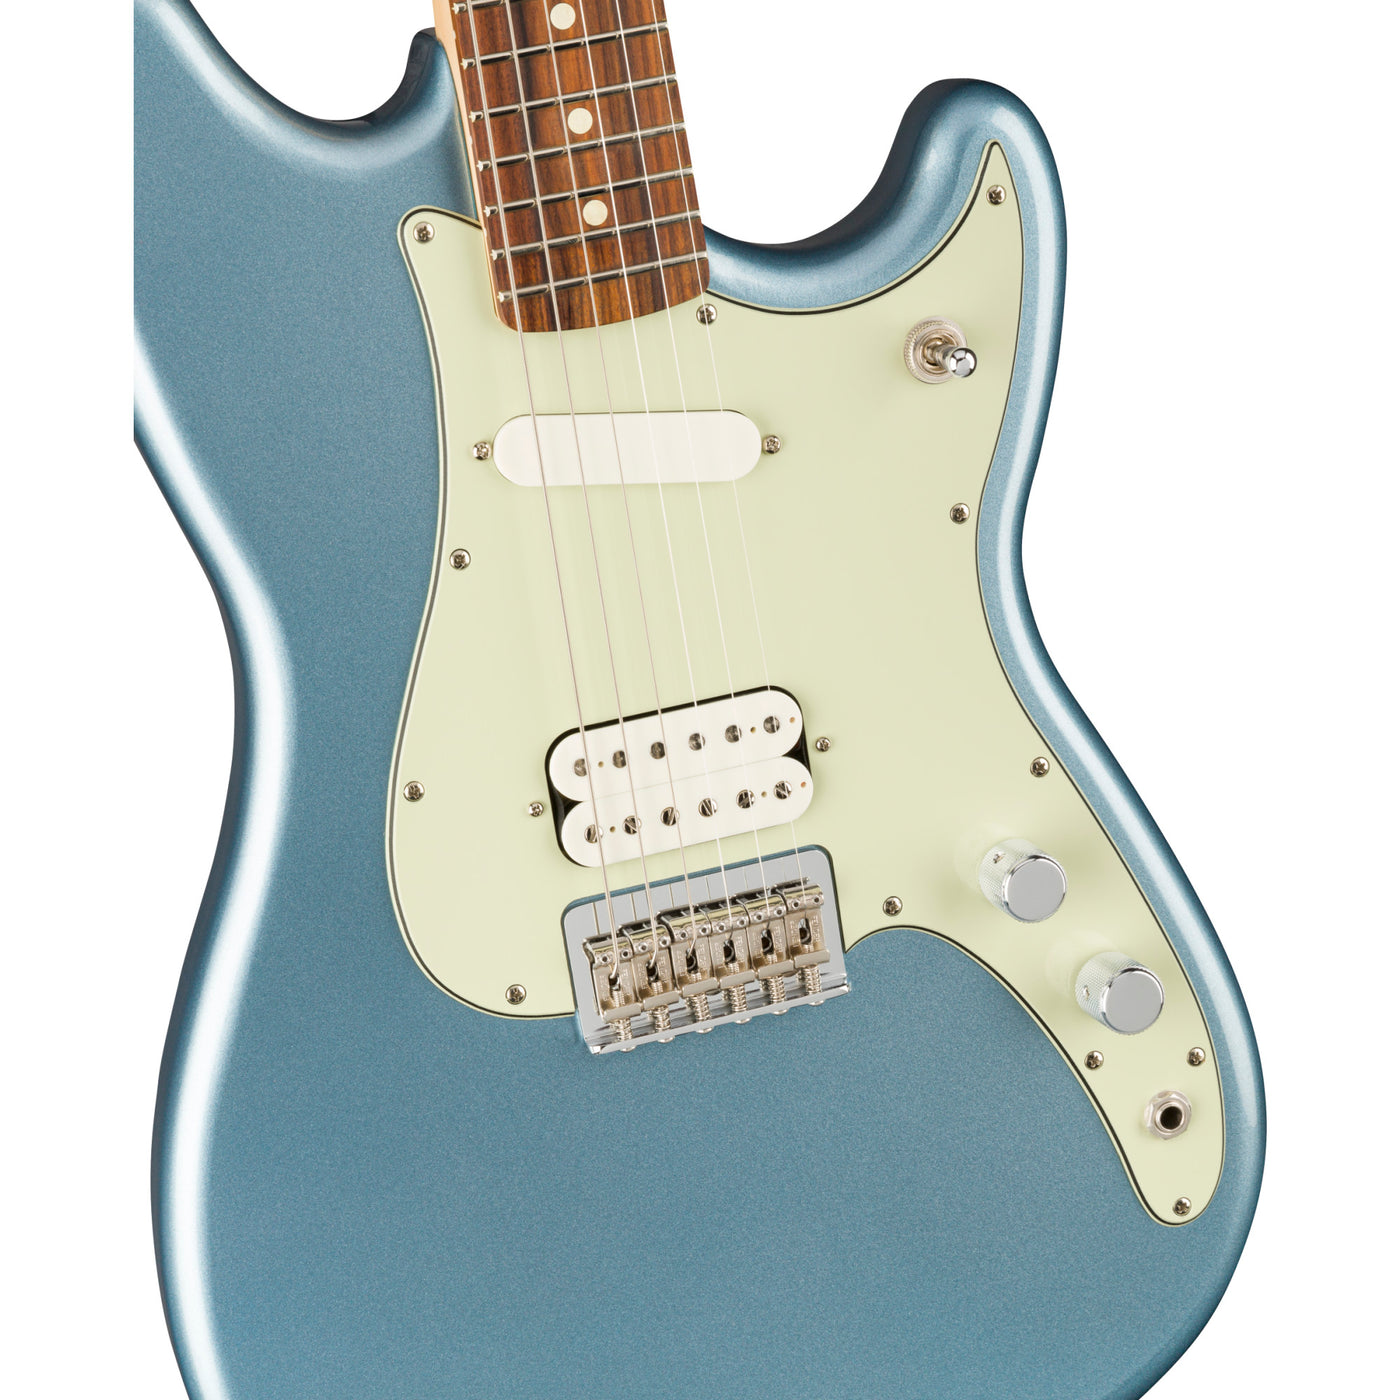 Fender Player Duo-Sonic HS Electric Guitar, Ice Blue Metallic (0144023583)